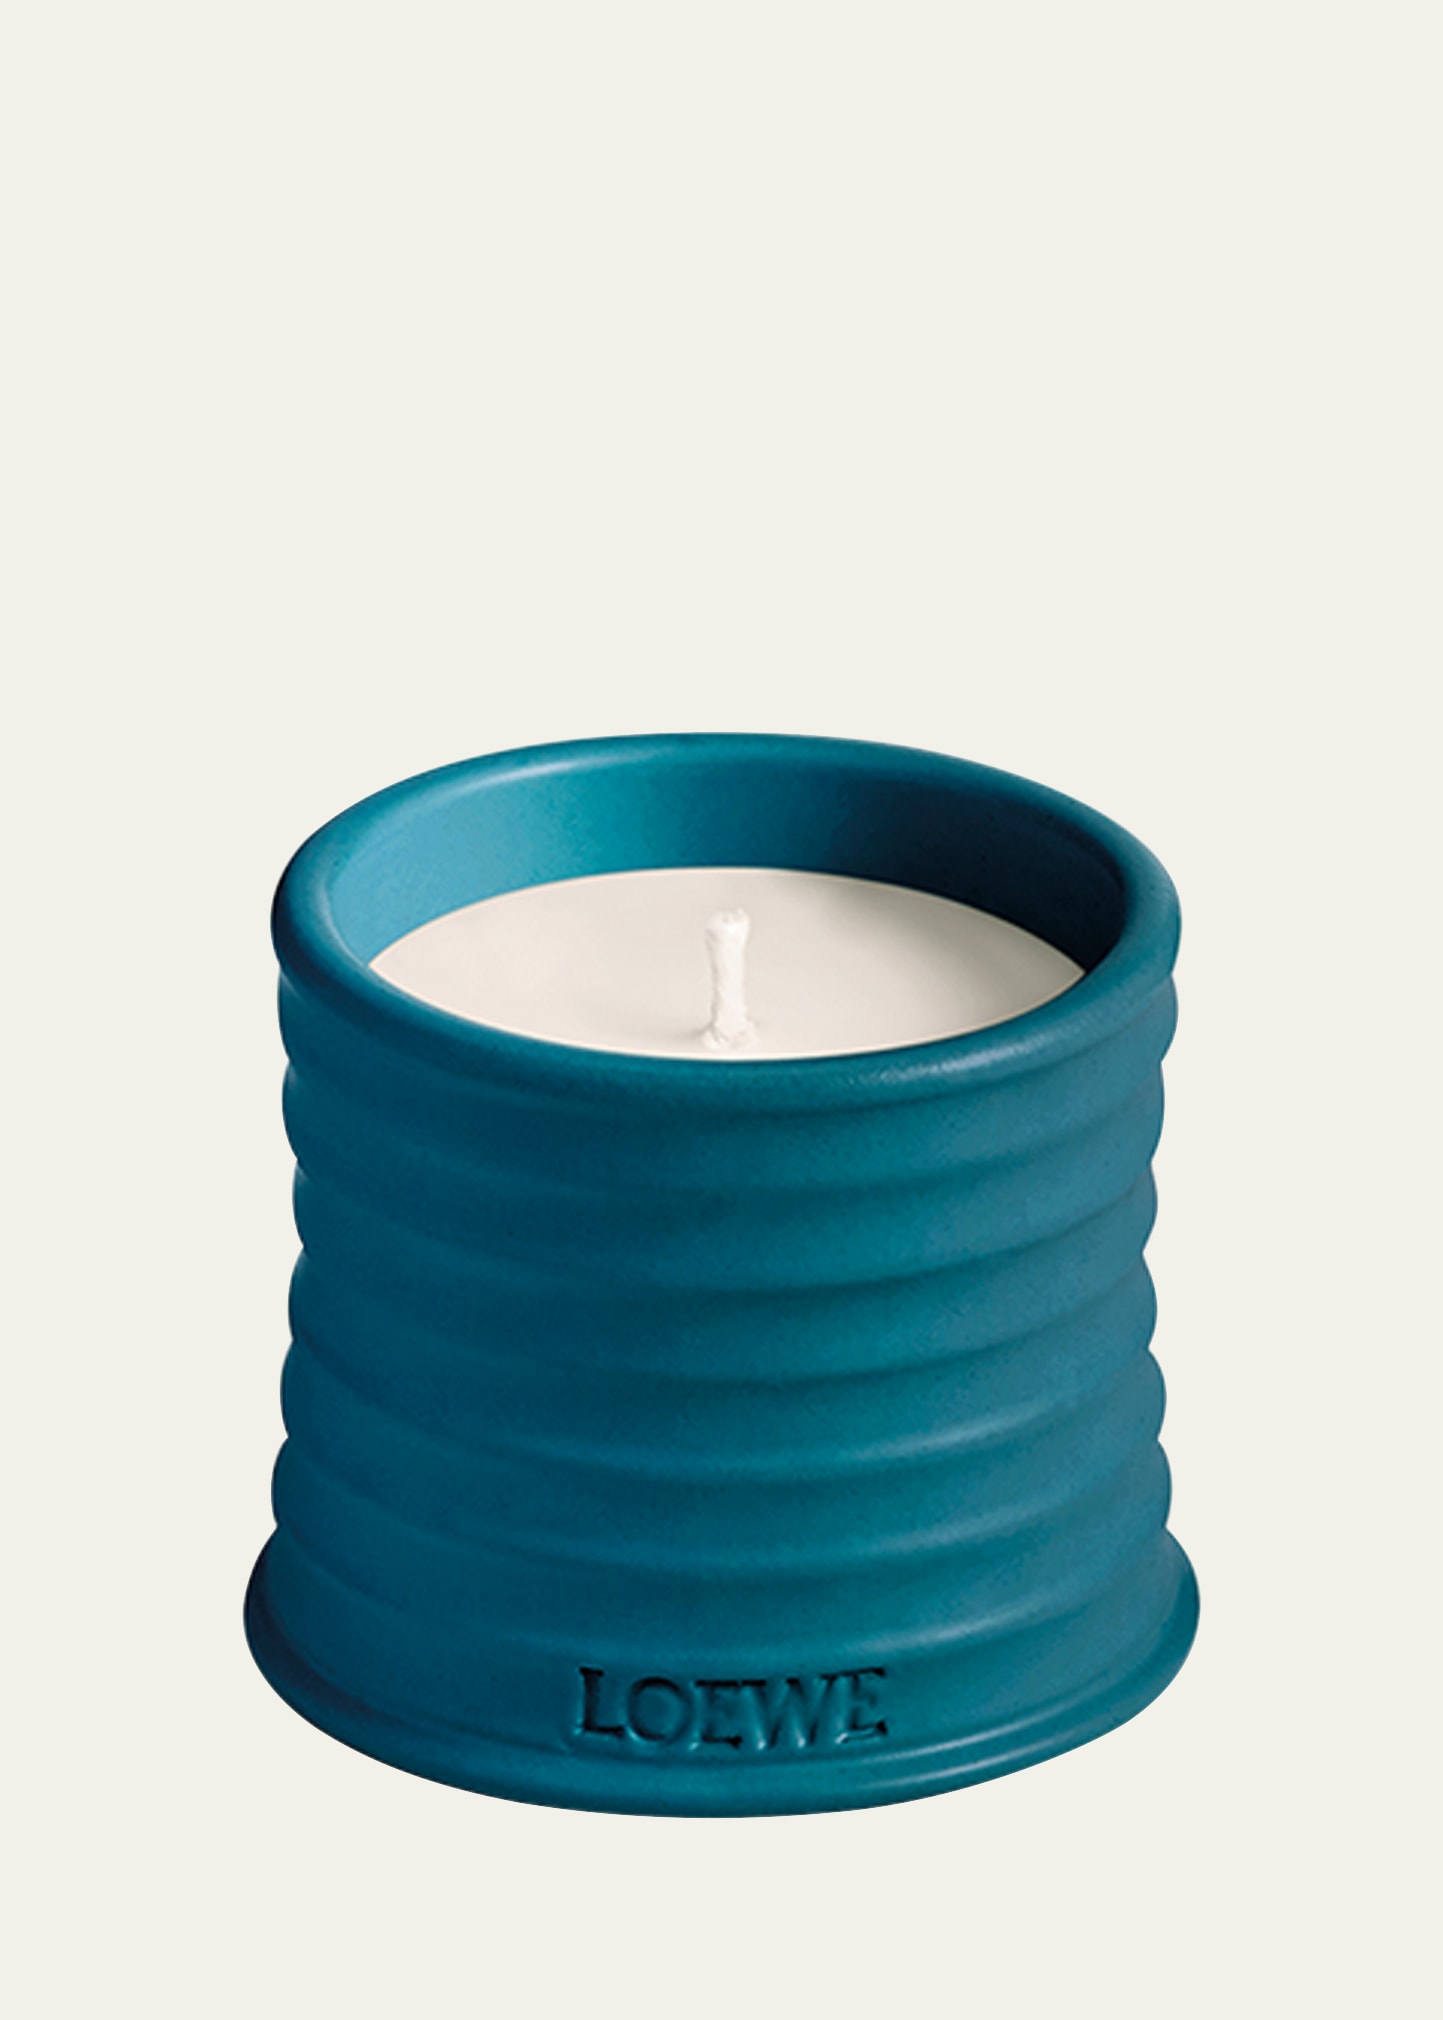 Loewe Small Incense Candle, 170 G